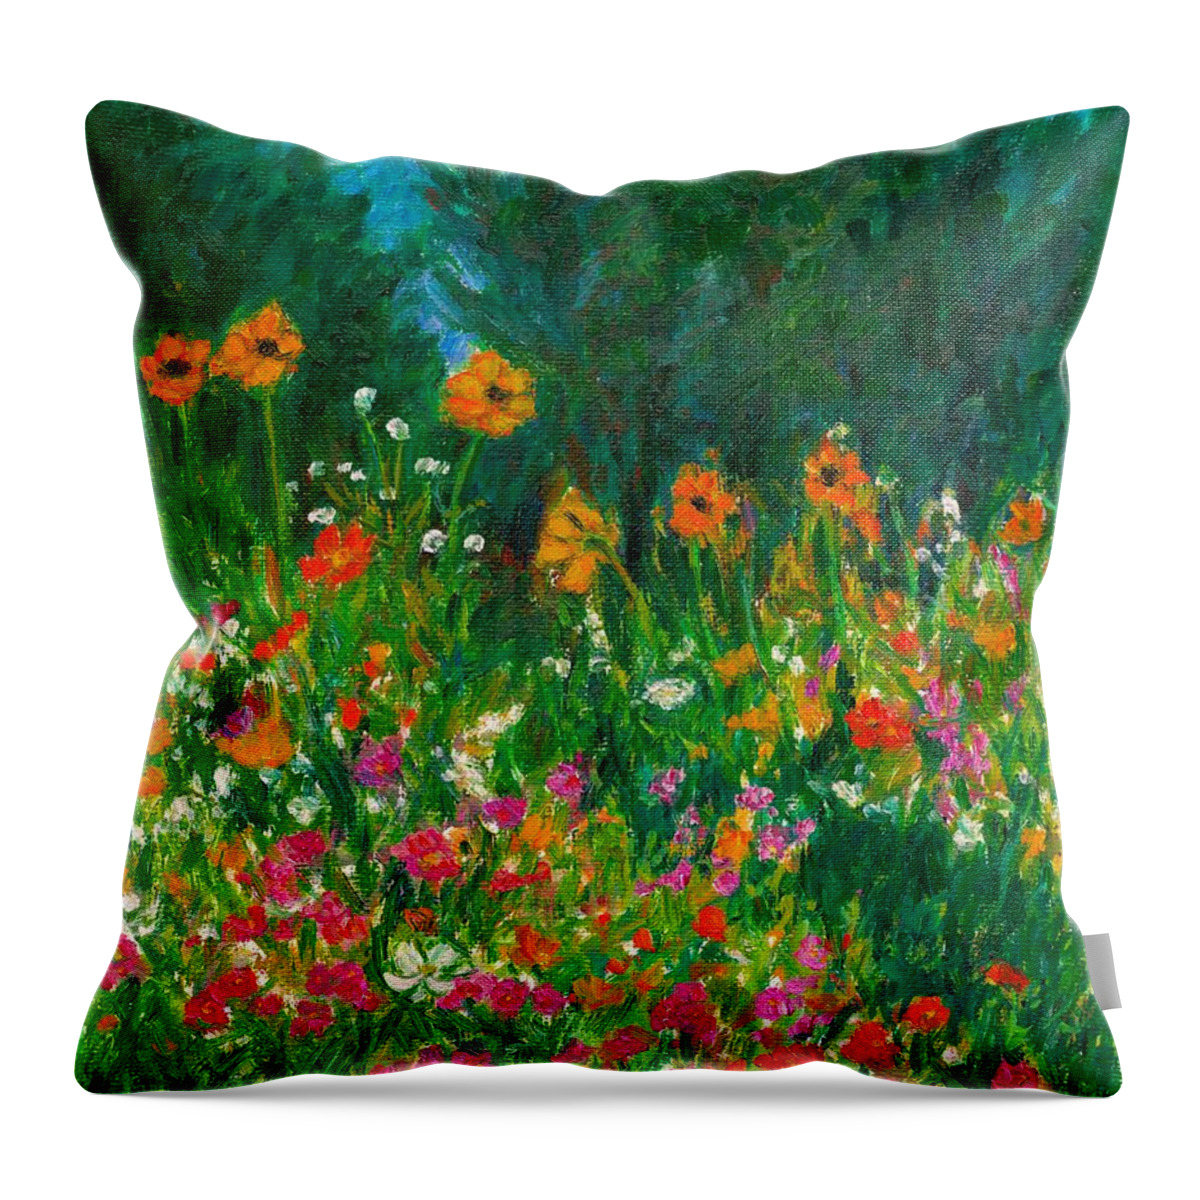 Wildflowers Throw Pillow featuring the painting Wildflower Rush by Kendall Kessler